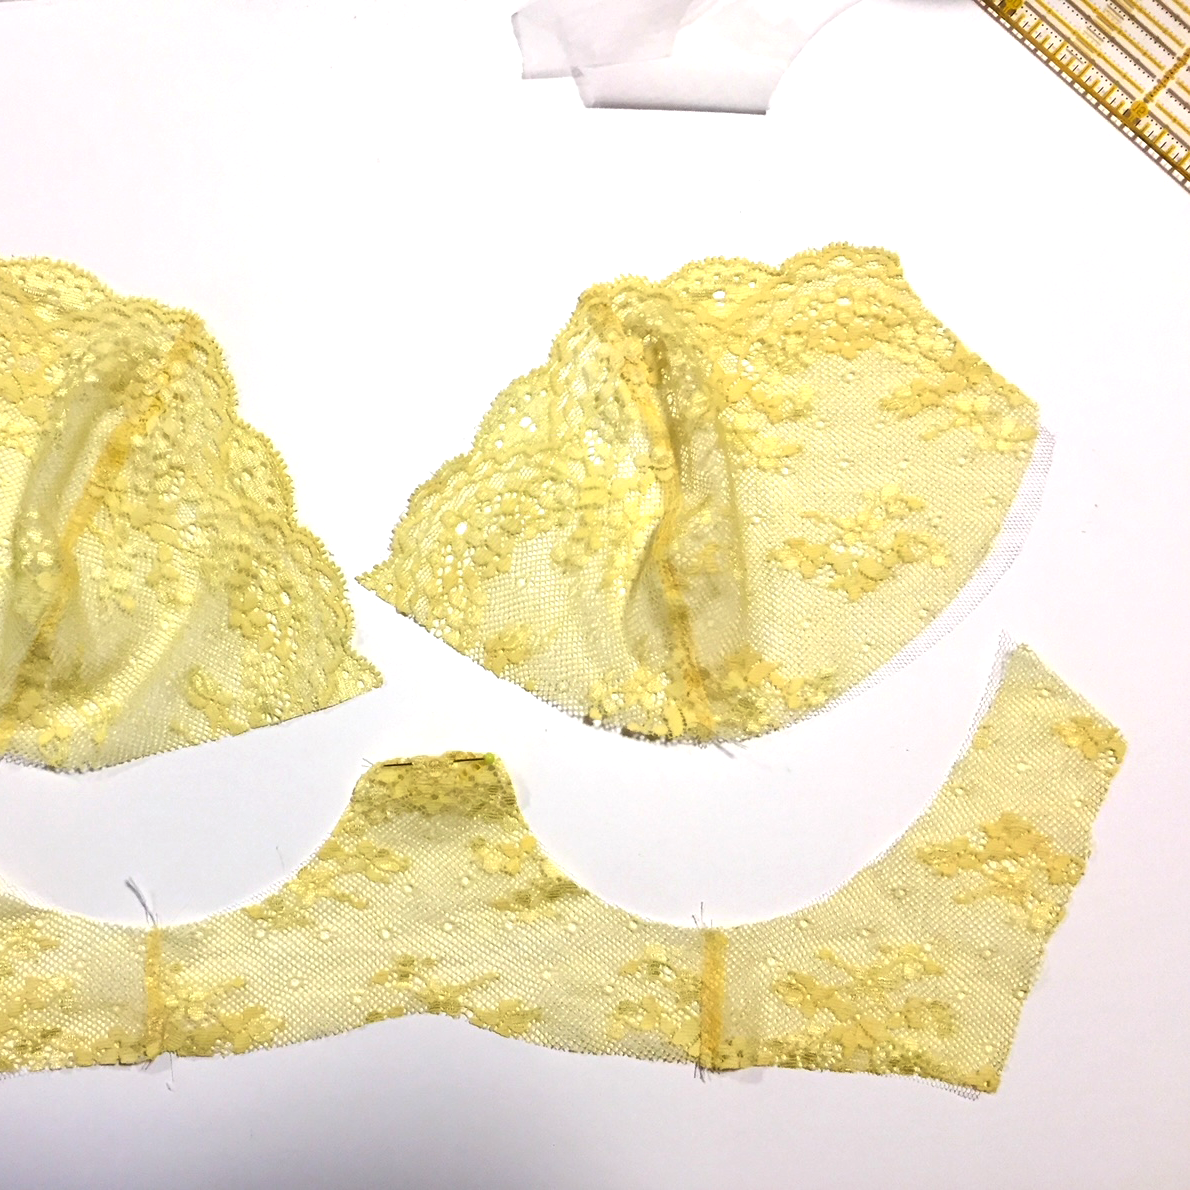 Make your own Bra Sewing Course